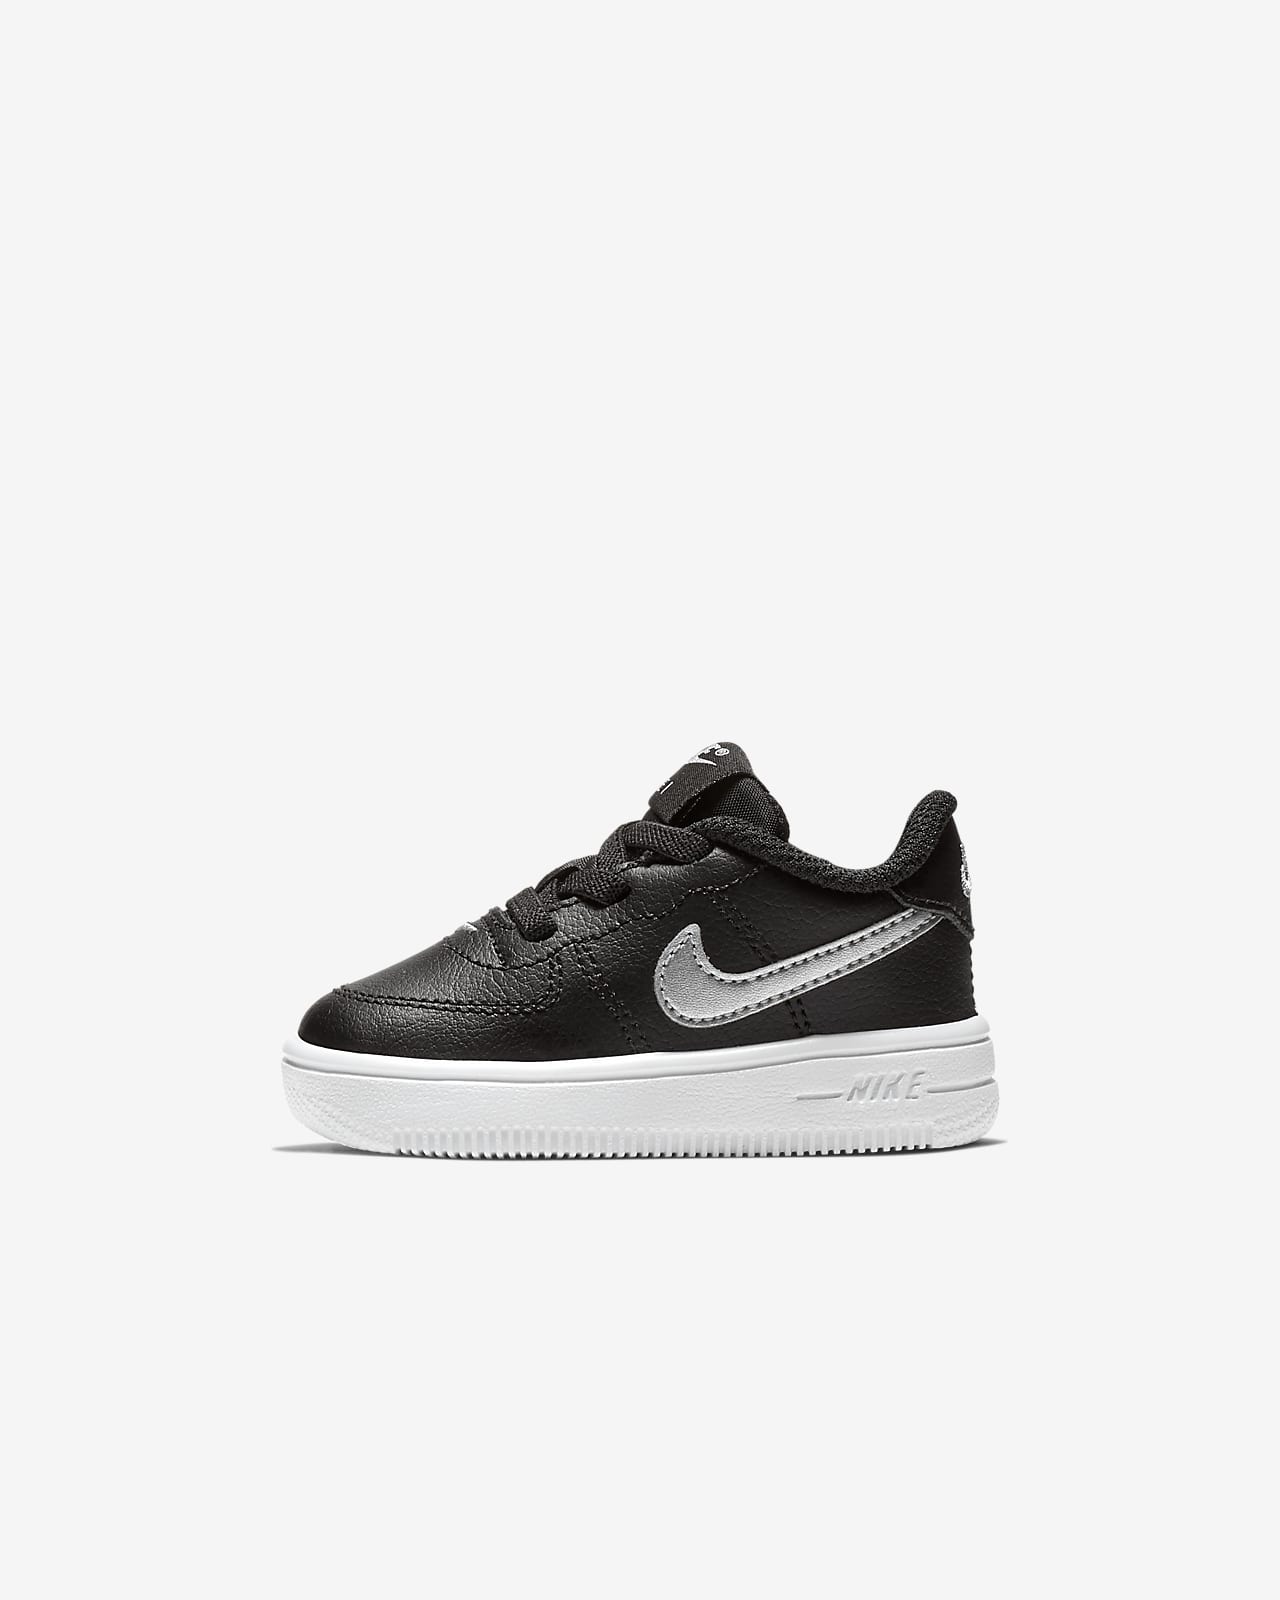 Nike Force 1 '18 Baby/Toddler Shoes